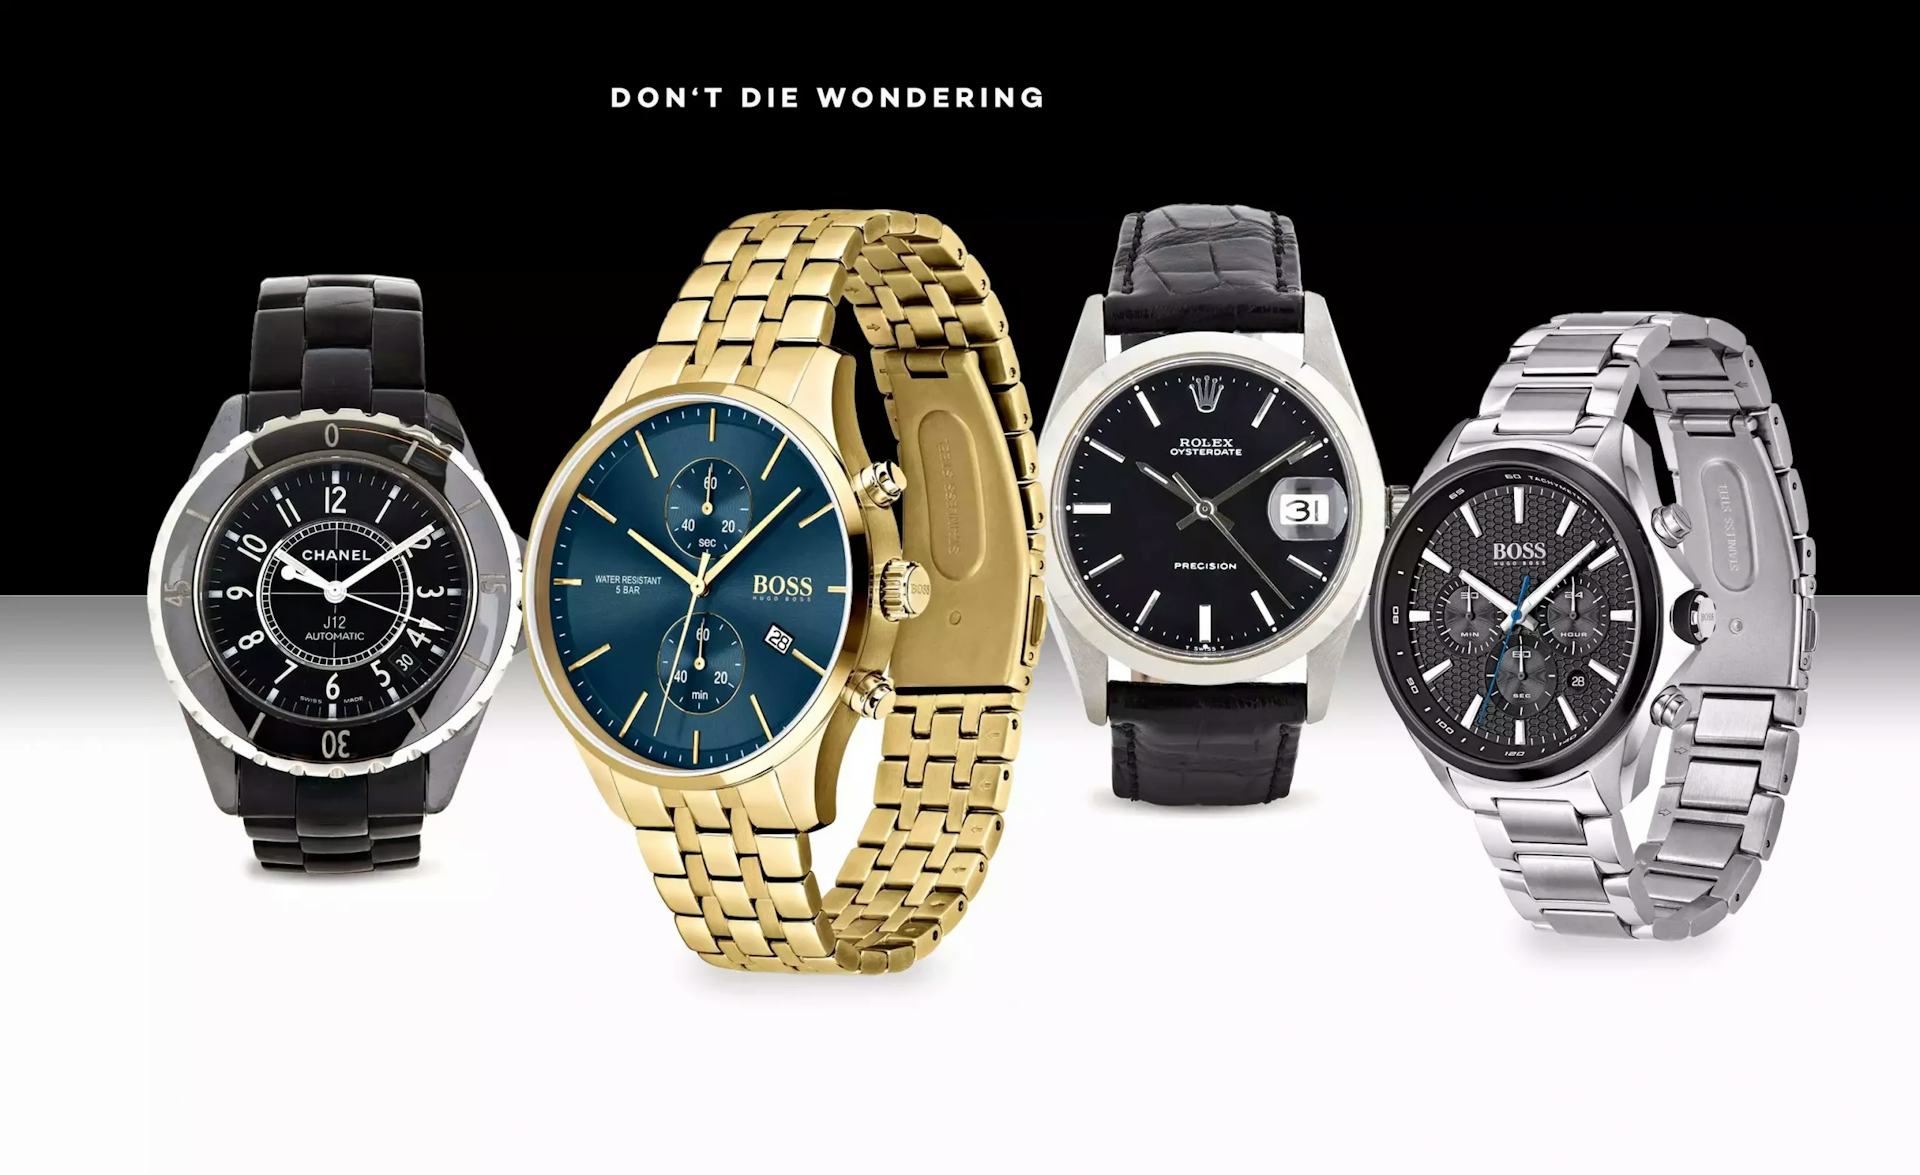 DDW Selects The Very Best In Luxury Watches